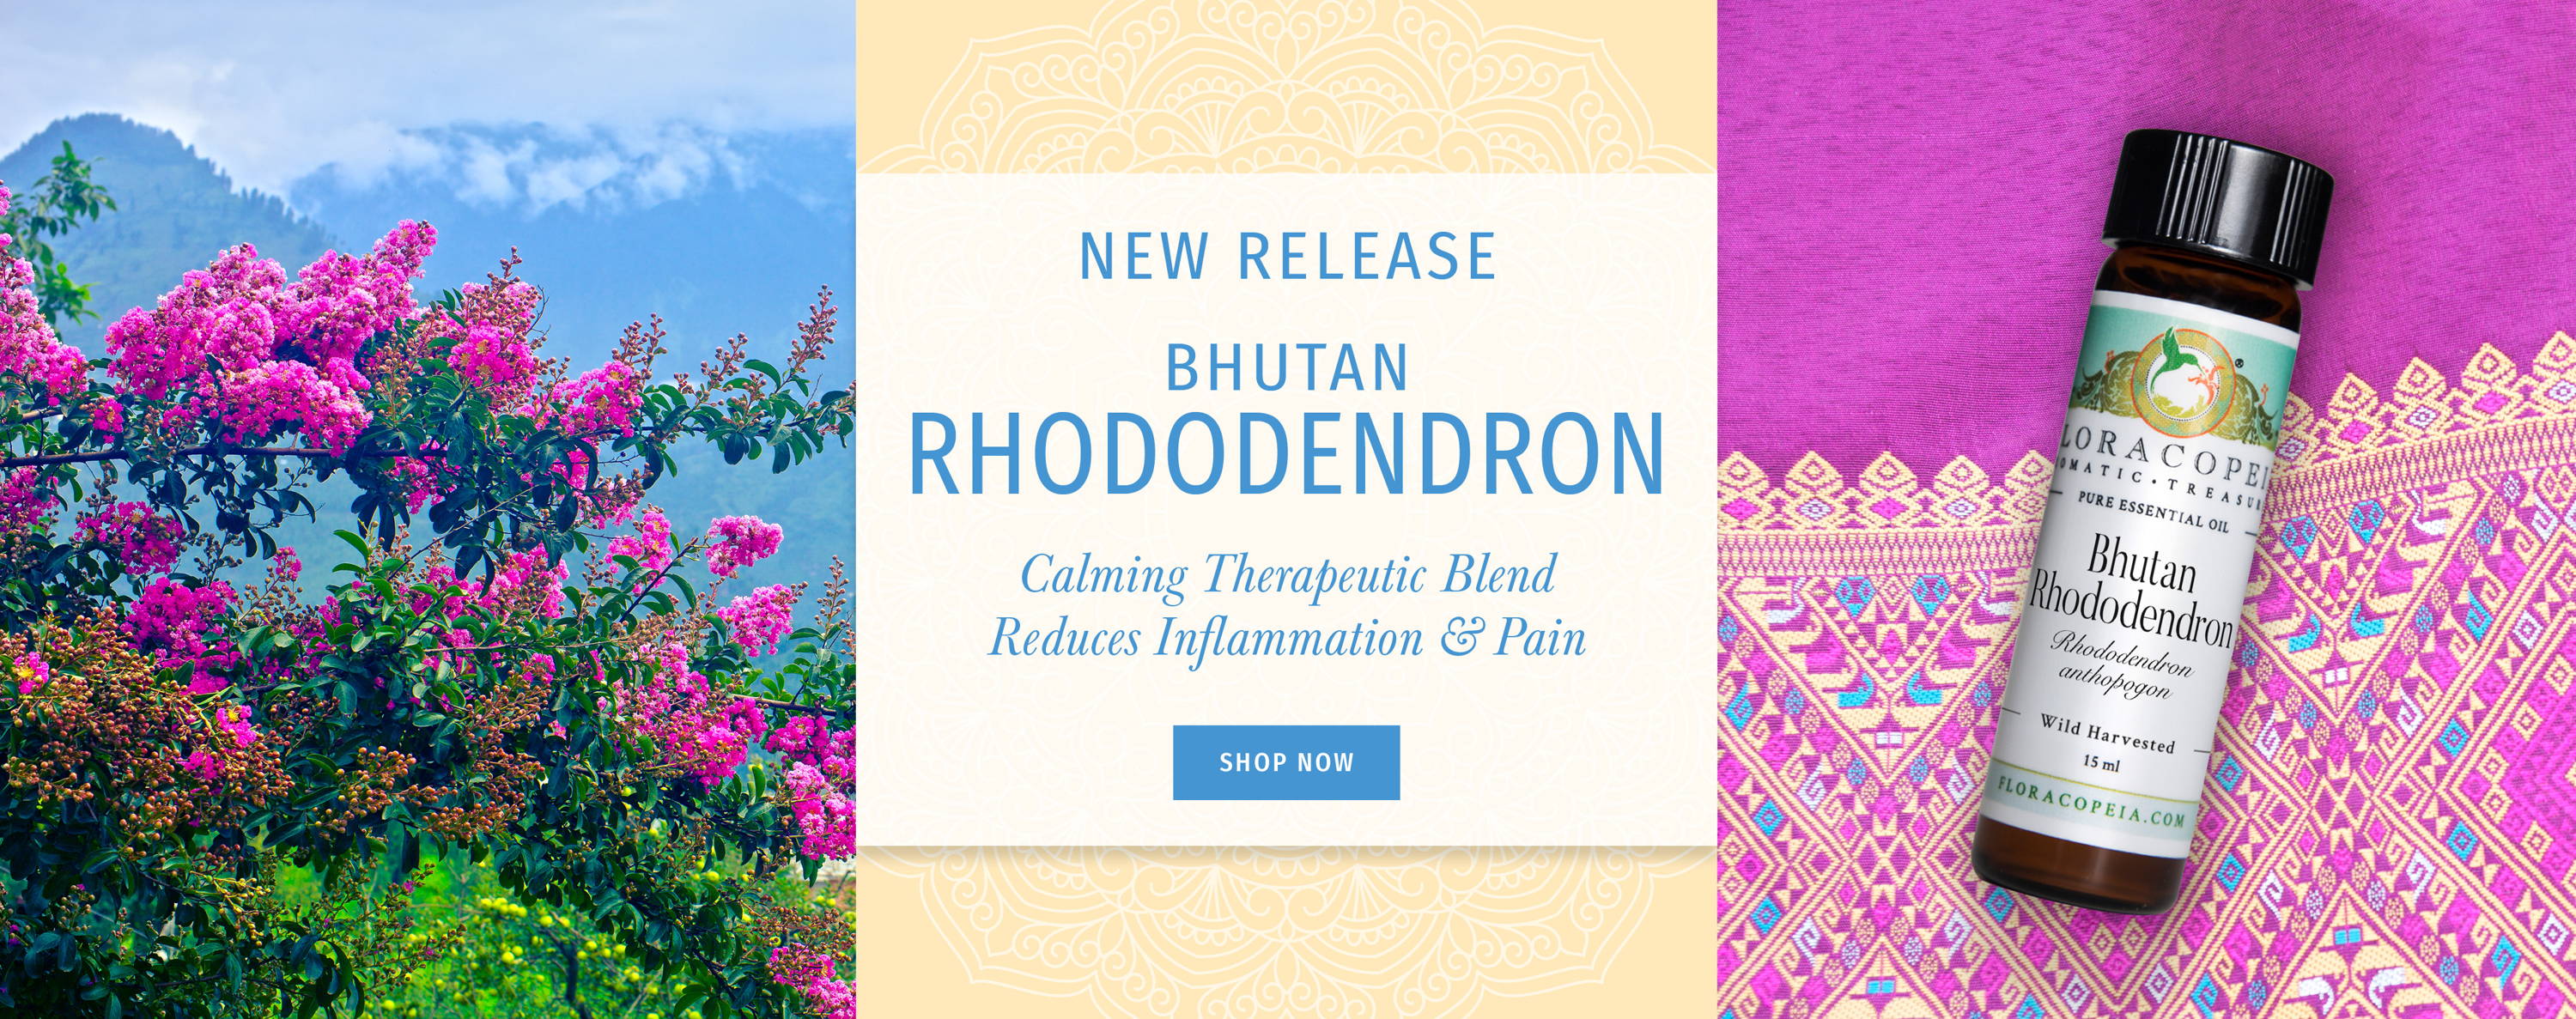 rhododendrons in front of mountains and a bottle of the oil on a pink asian fabric middle reads new release Bhutan Rhododendron calming therapeutic blend reduces inflammation and pain shop now